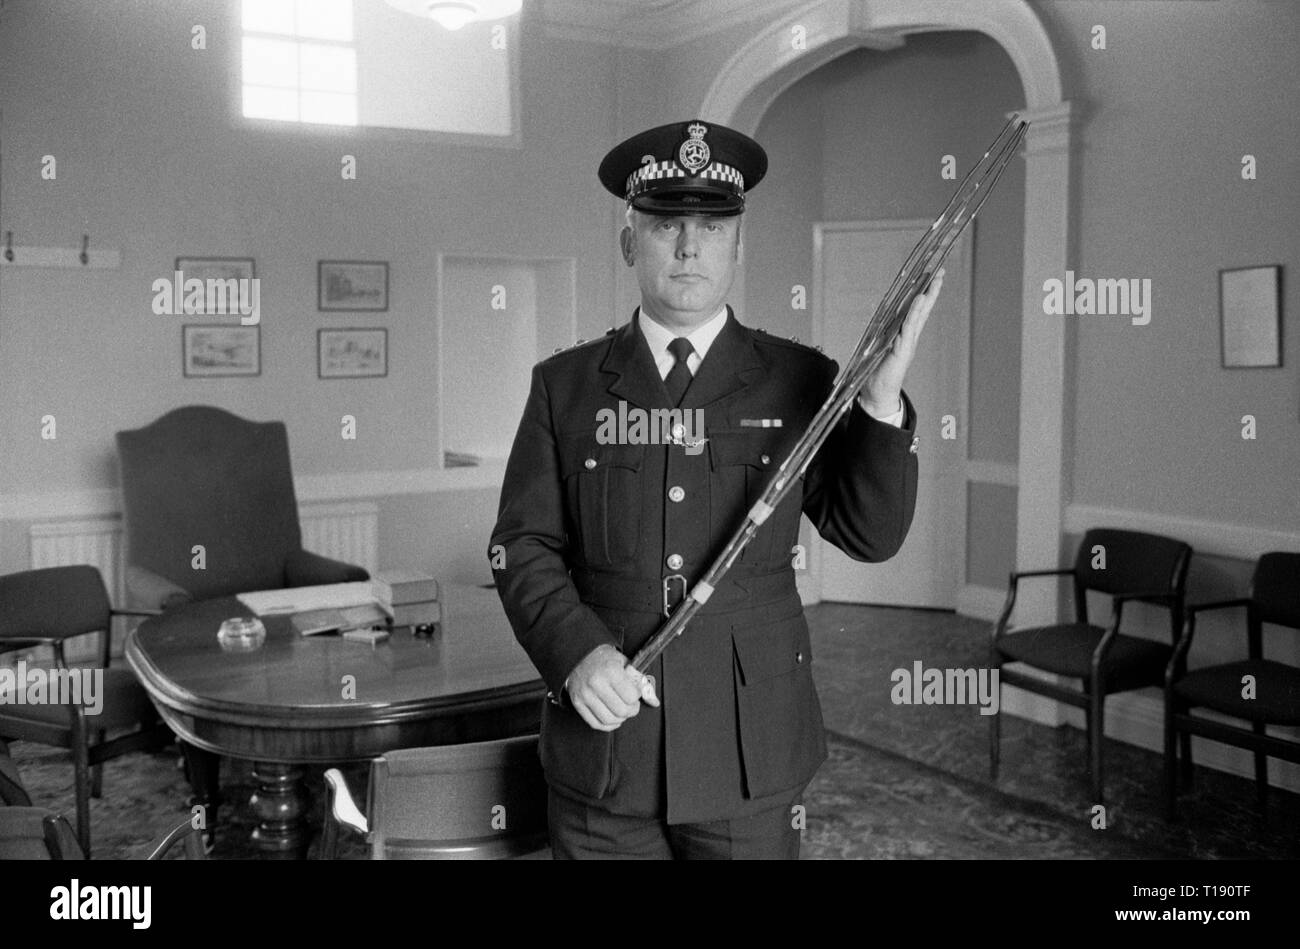 Corporal Punishment Law and Order the Isle of Man 1970s . Superintendent Alan Killip, the Isle of Man's highest ranking police officer holding a birch rod at Castle Rushen, Castletown. The Manx birch rod was still used for corporal punishment on the Isle of Man during the 1970s. Administered by the police to petty offenders. 1978 HOMER SYKES Stock Photo